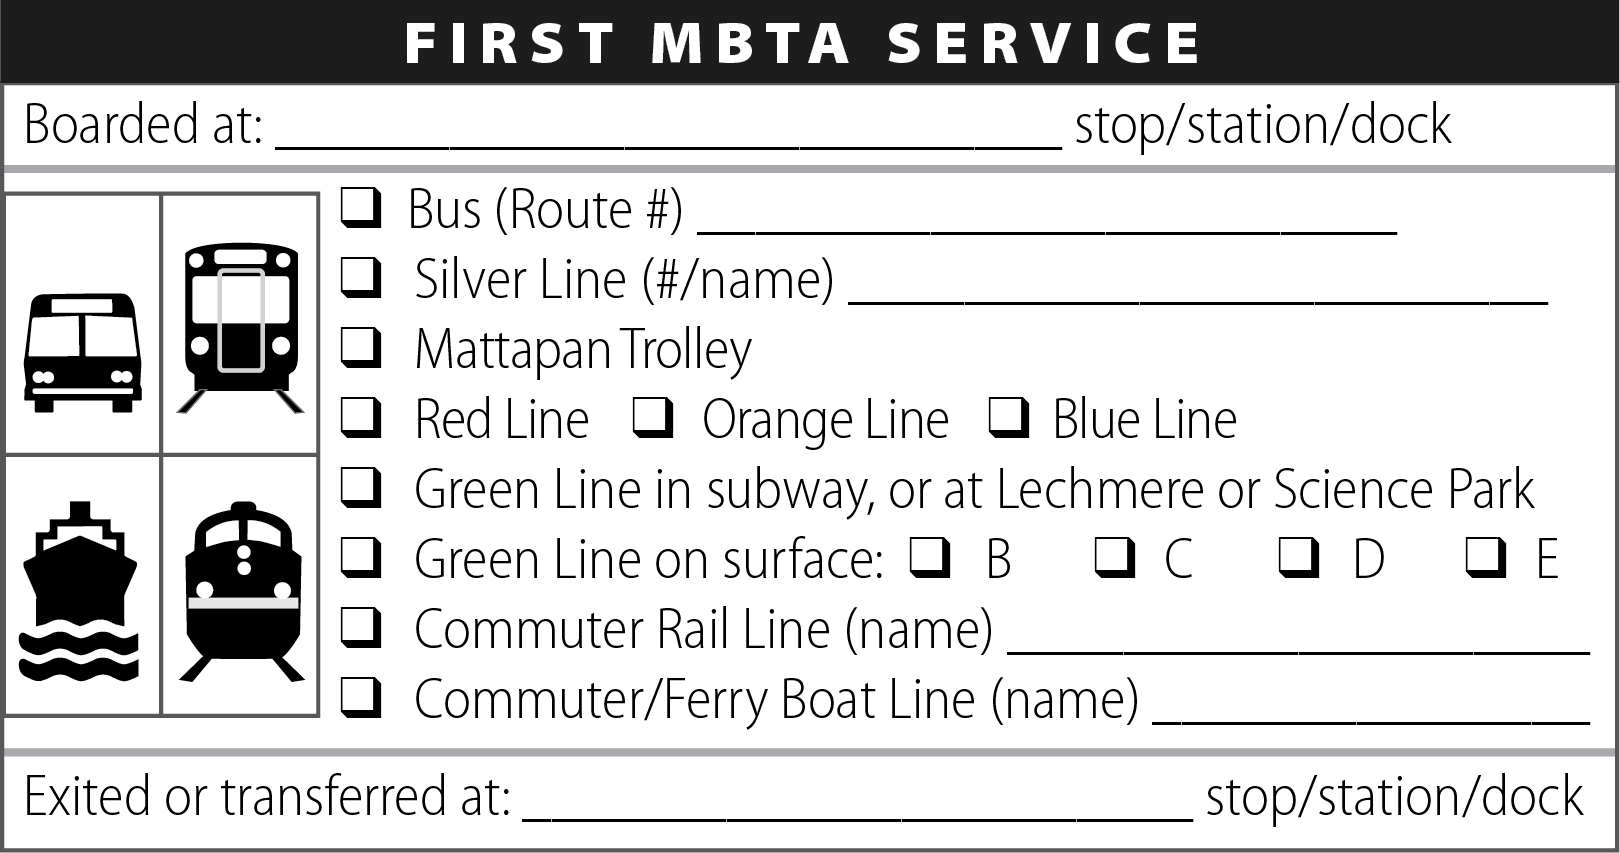 Figure 7 is an image of the section of the survey form that asked which MBTA service and boarding location the survey respondent used first in the trip being described